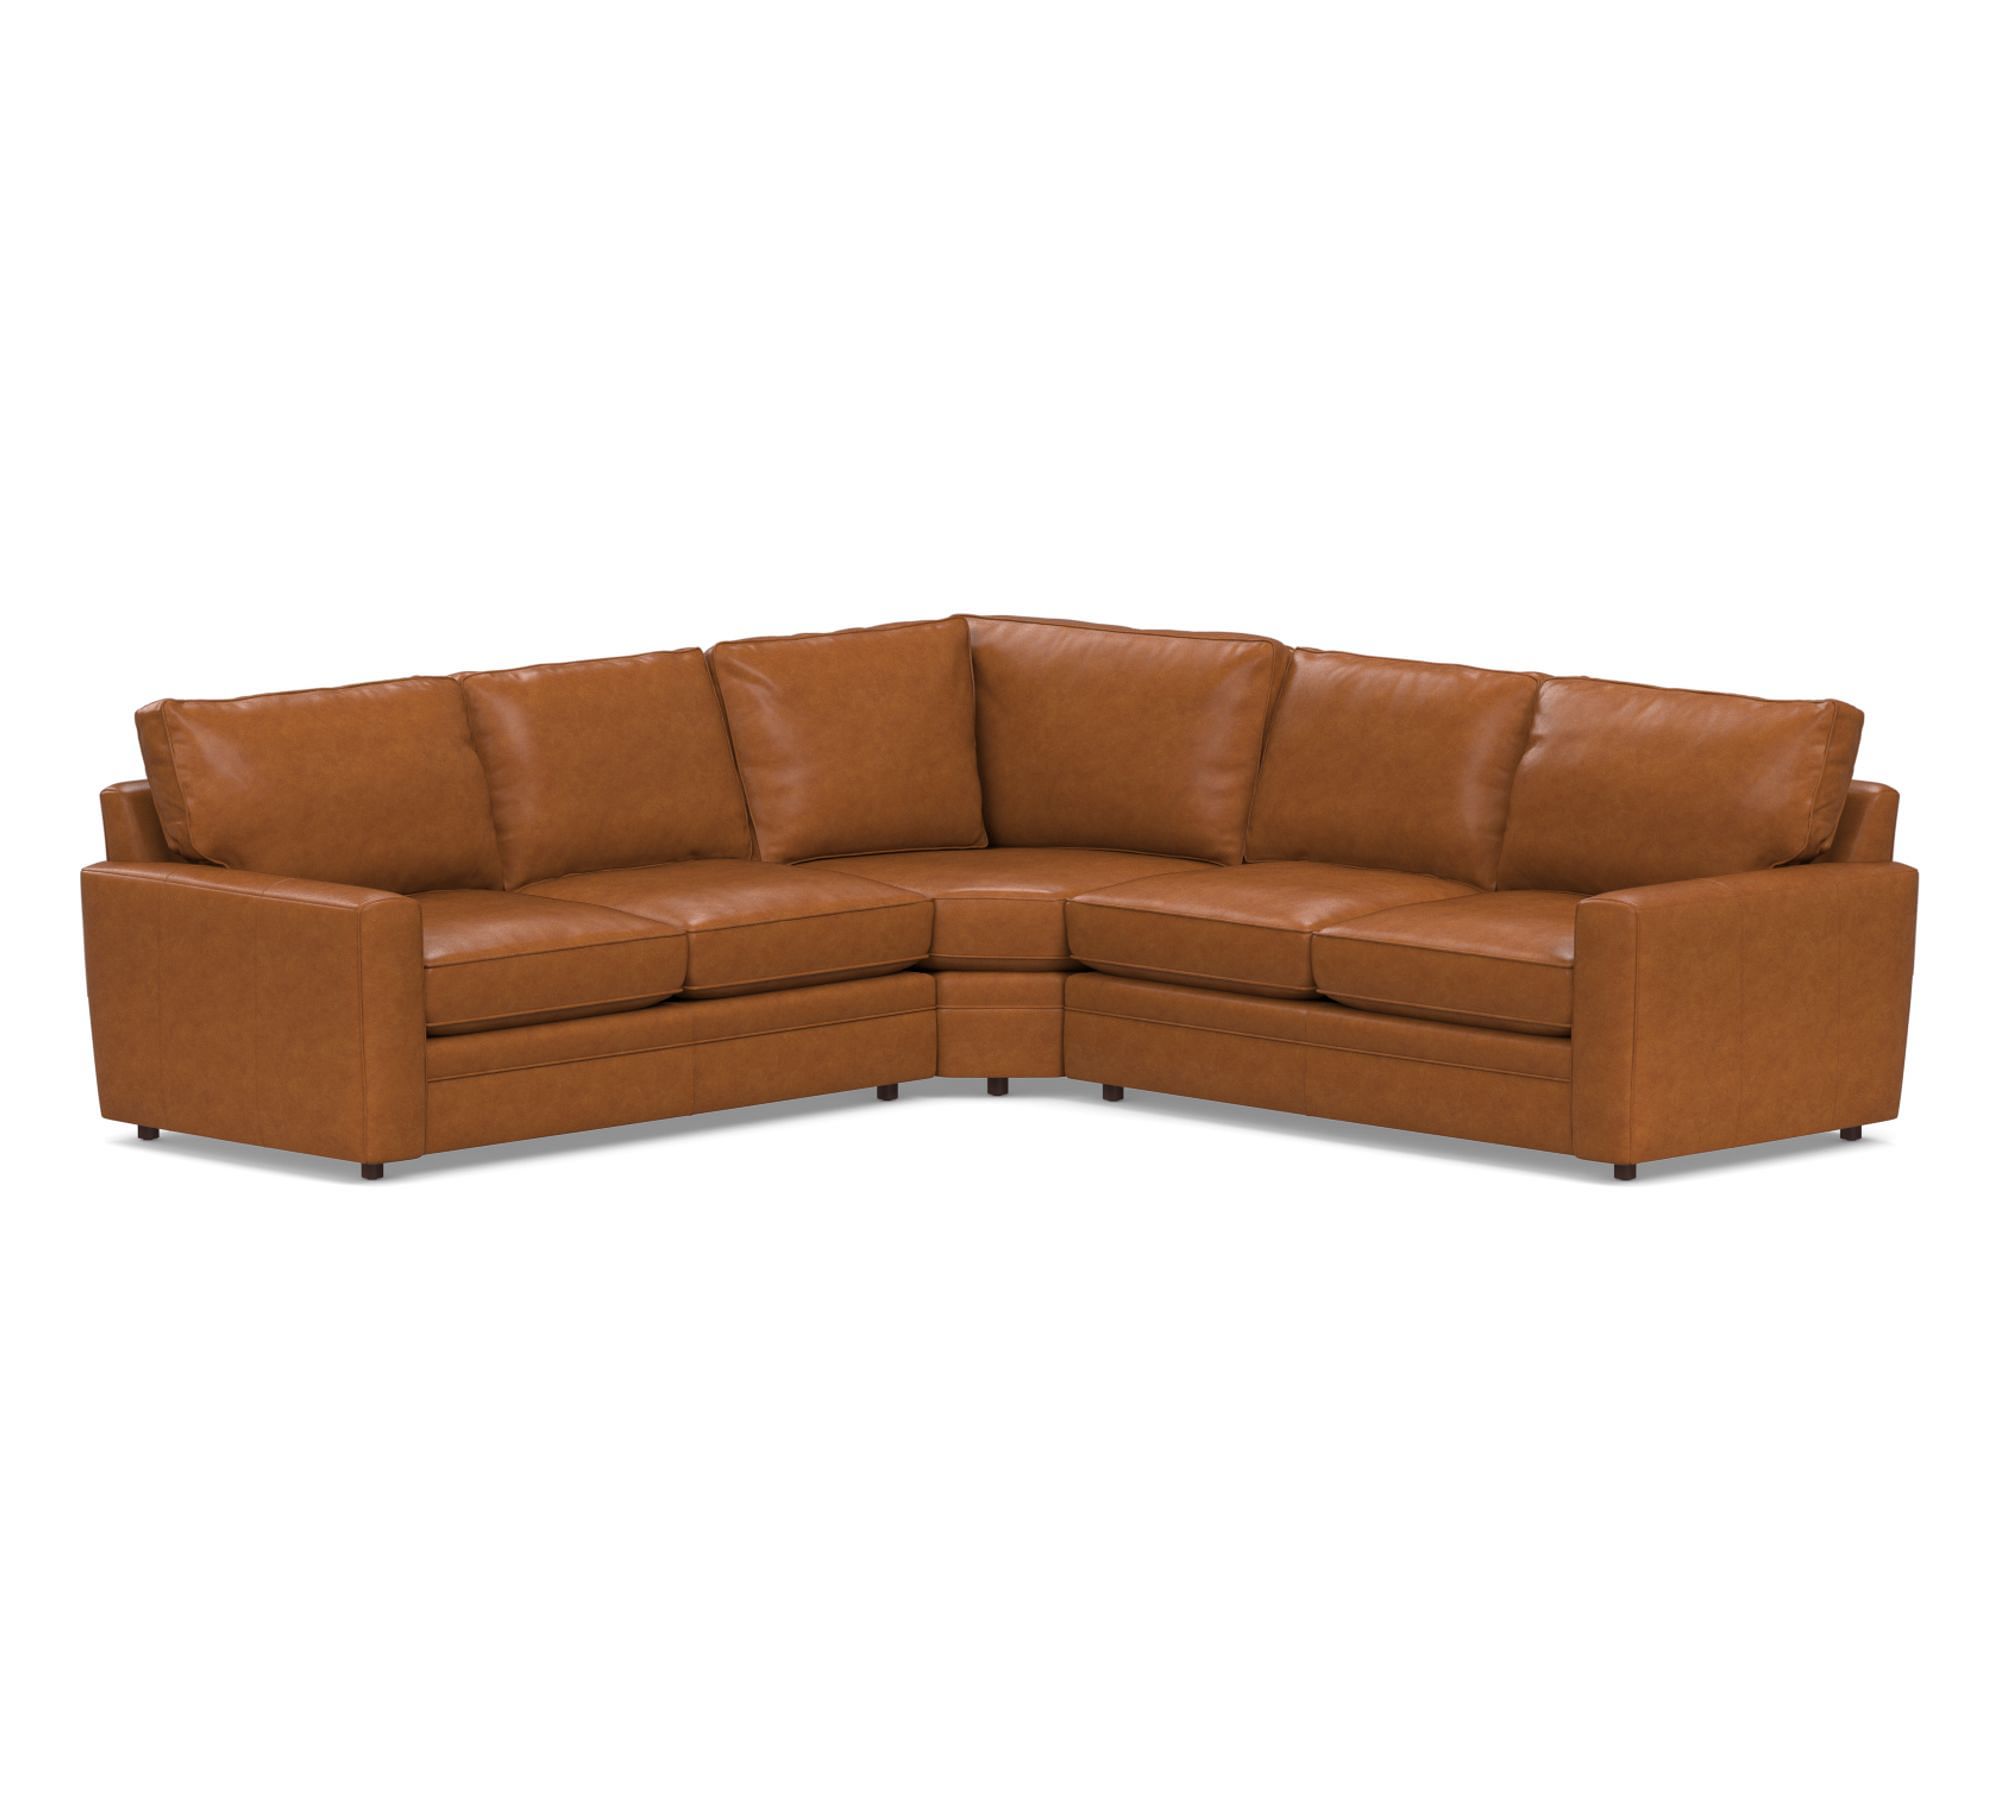 Pearce Square Arm Leather 3-Piece L-Shaped Wedge Sectional (120")